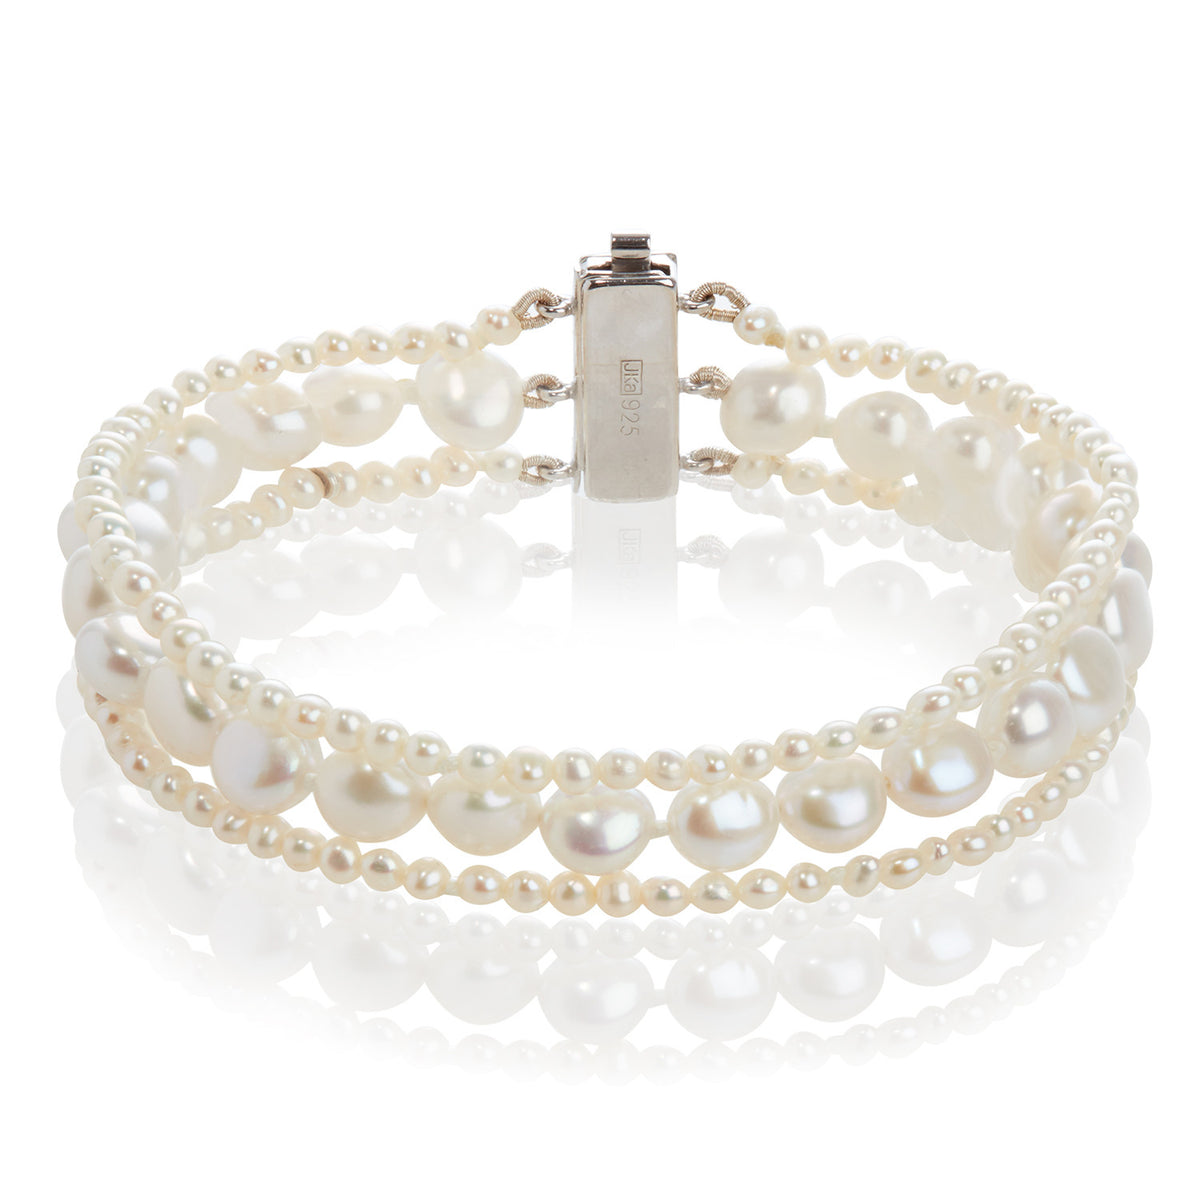 3 Strand Cultured Freshwater White Pearl Mixed Bracelet